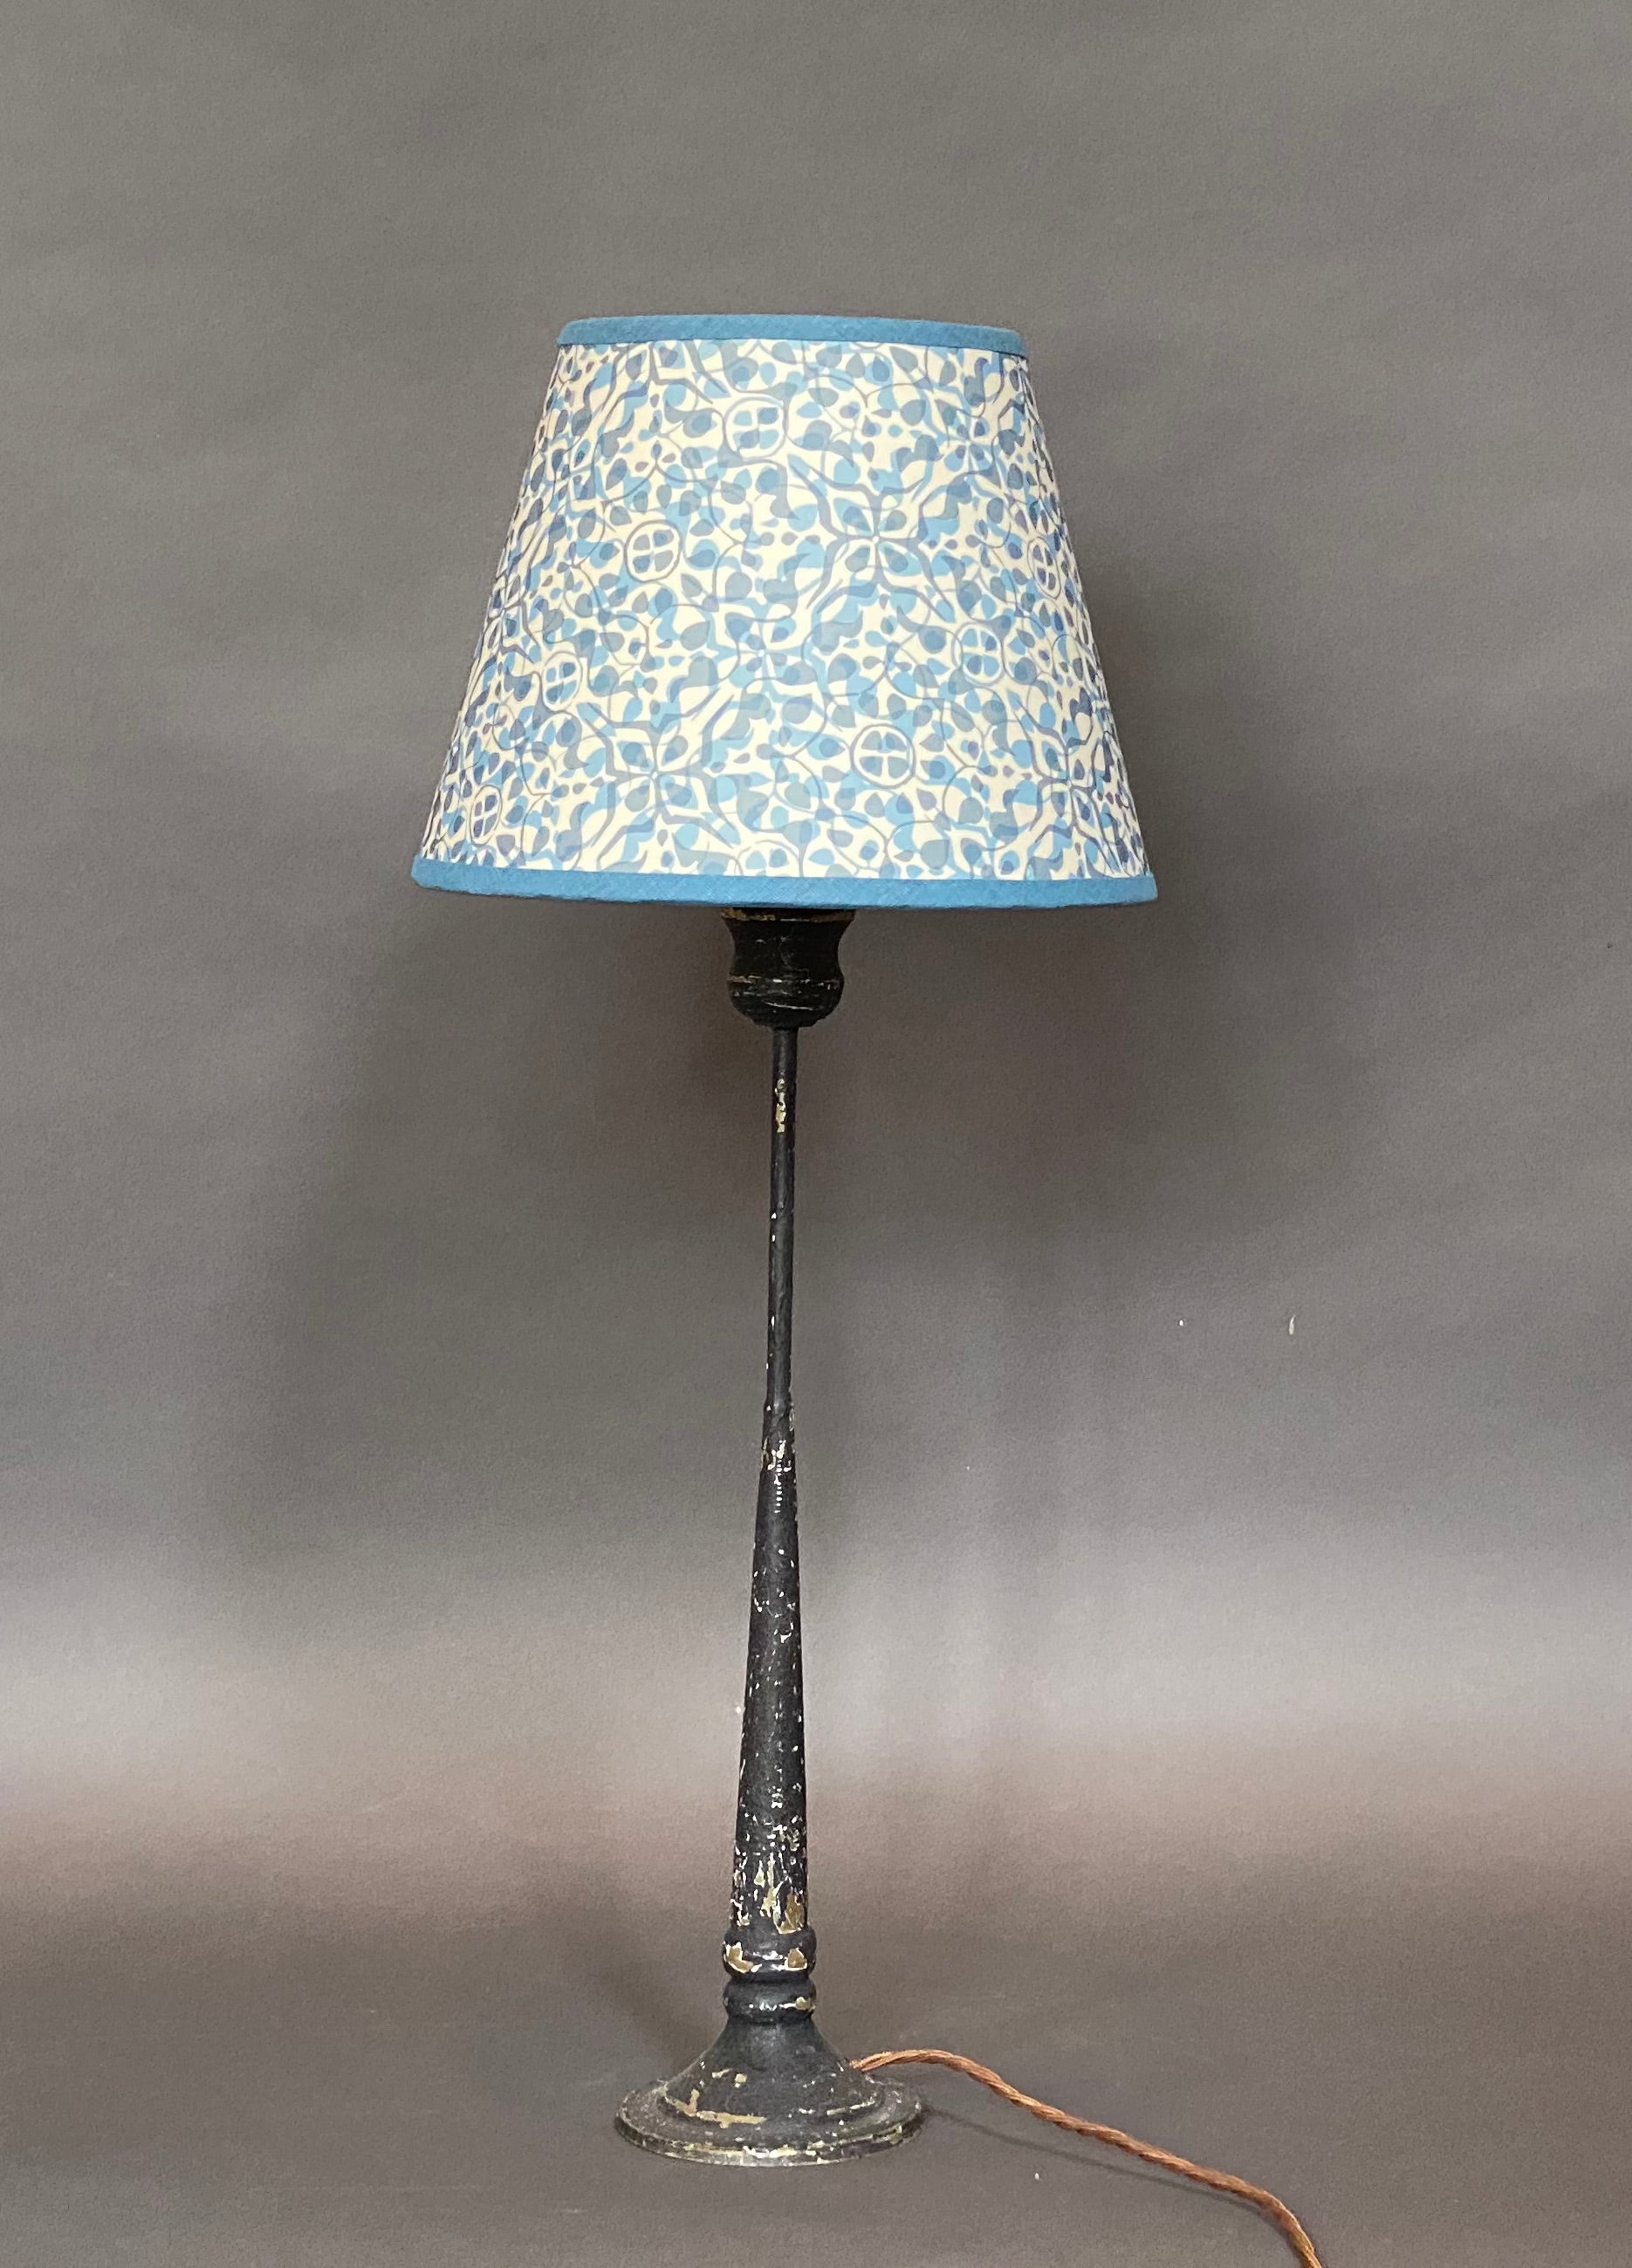 Dappled blue paper lampshade on lamp